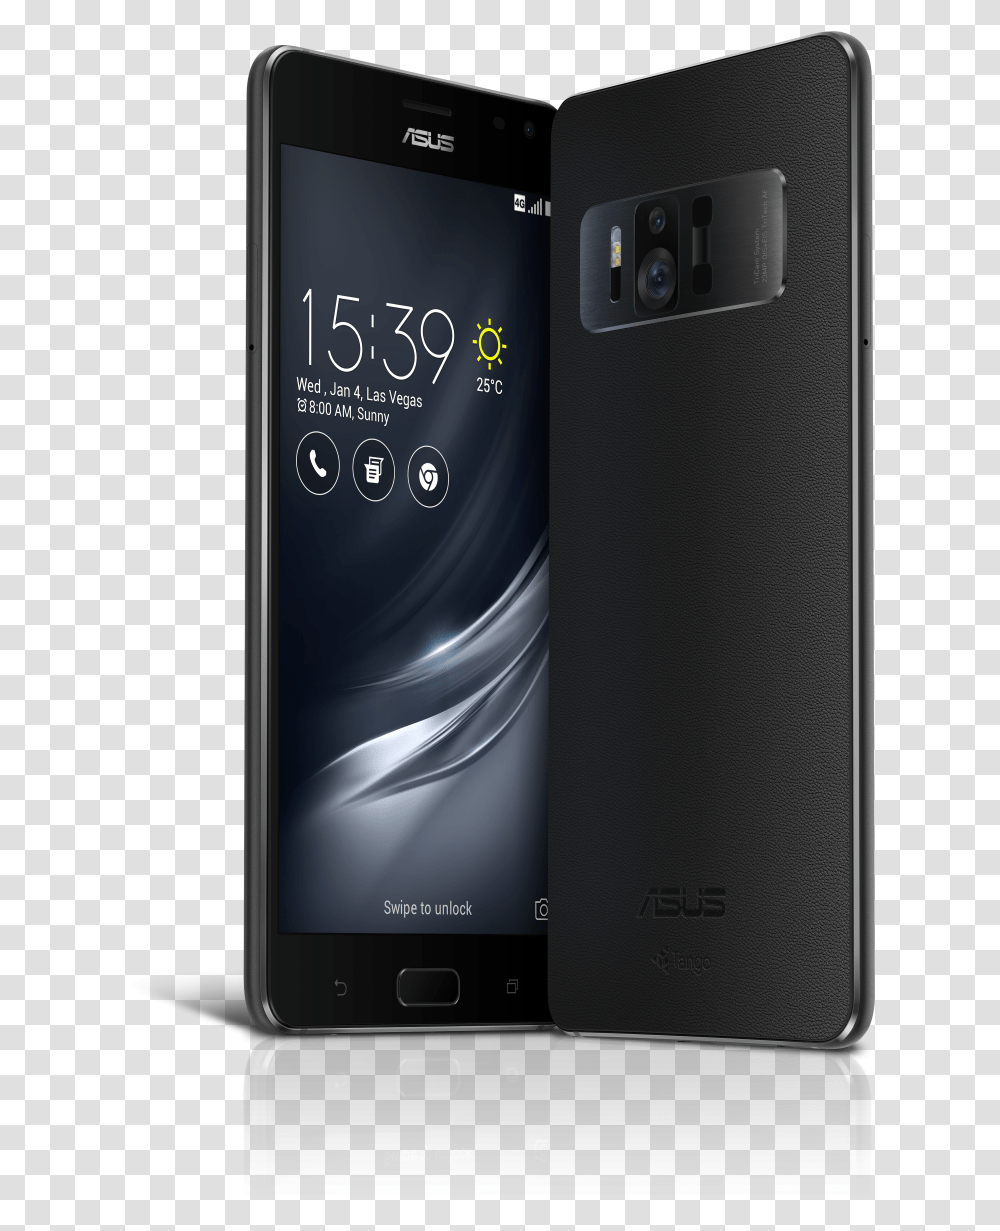 Verizon Asus Zenfone Ar Review Futuristic Tech Demonstrated Samsung Group, Mobile Phone, Electronics, Cell Phone, Iphone Transparent Png